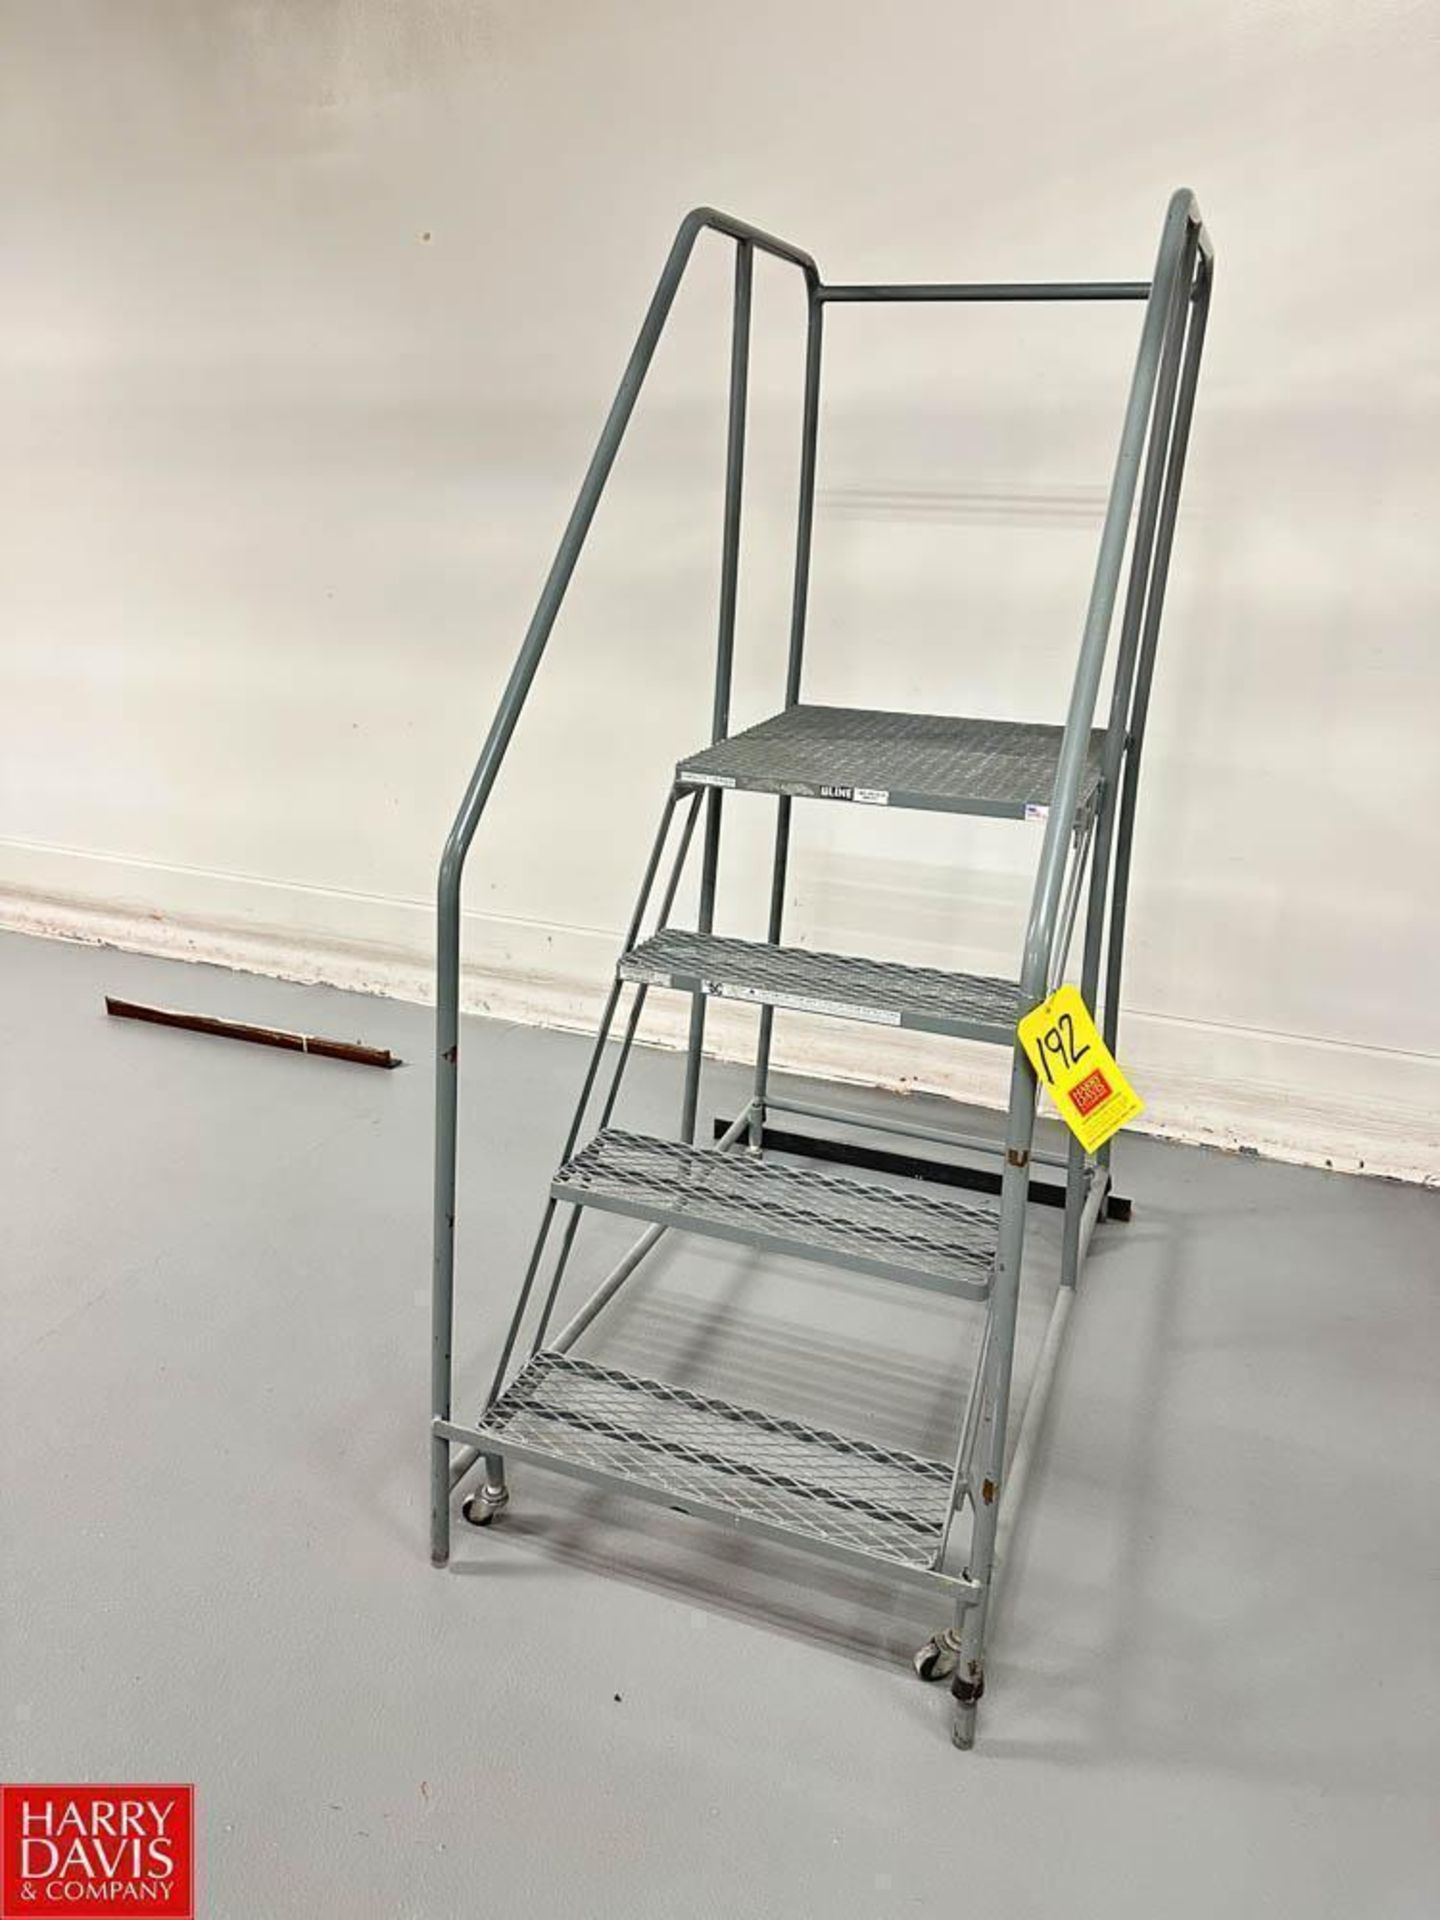 ULINE Portable Stairs - Rigging Fee: $35 - Image 2 of 2